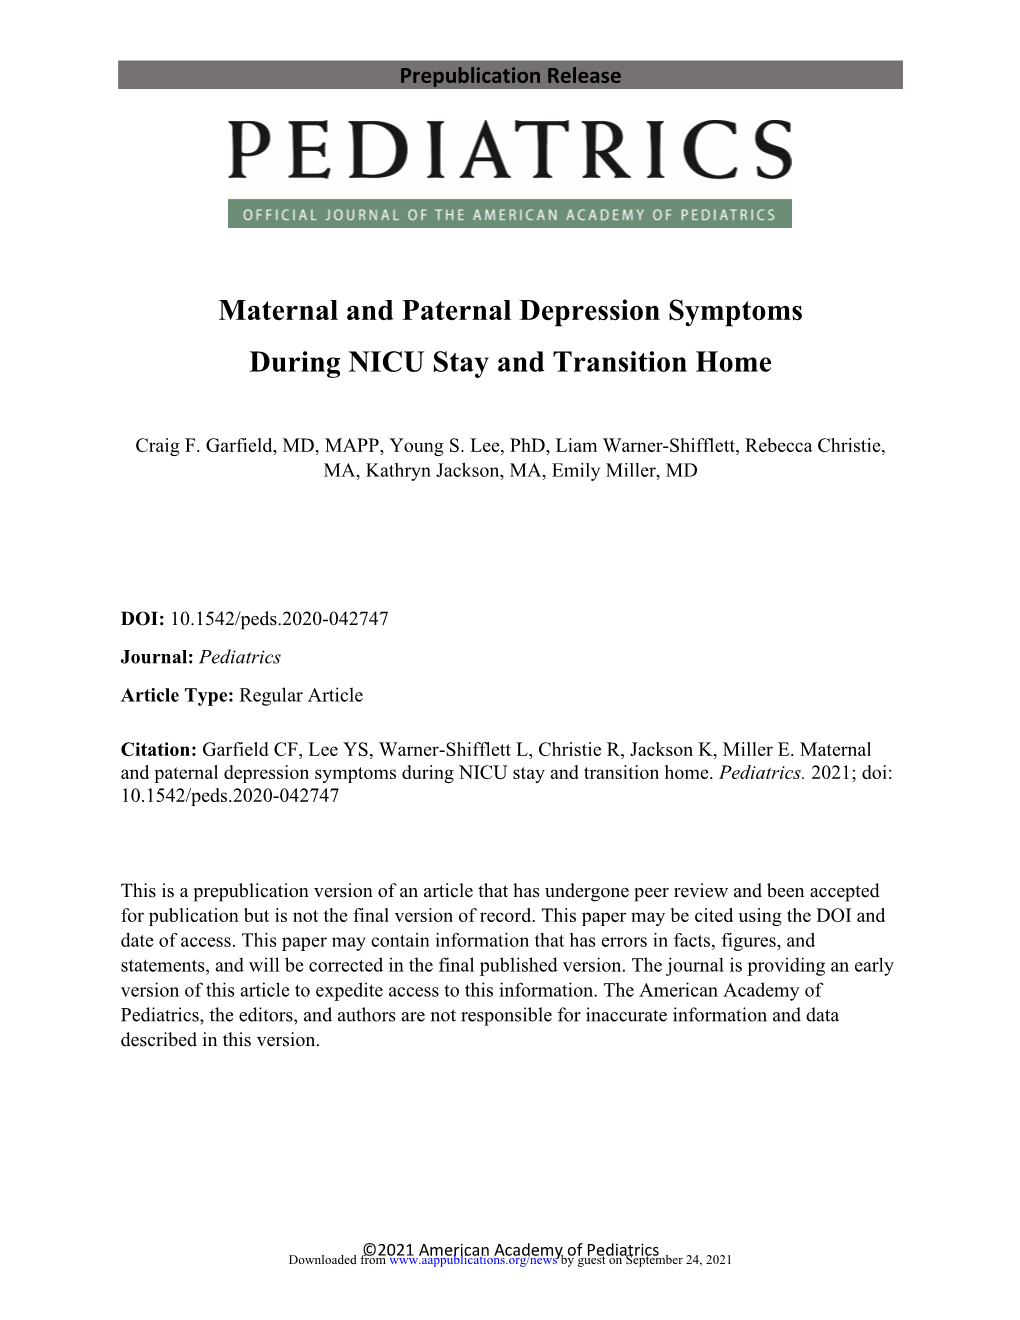 Maternal and Paternal Depression Symptoms During NICU Stay and Transition Home